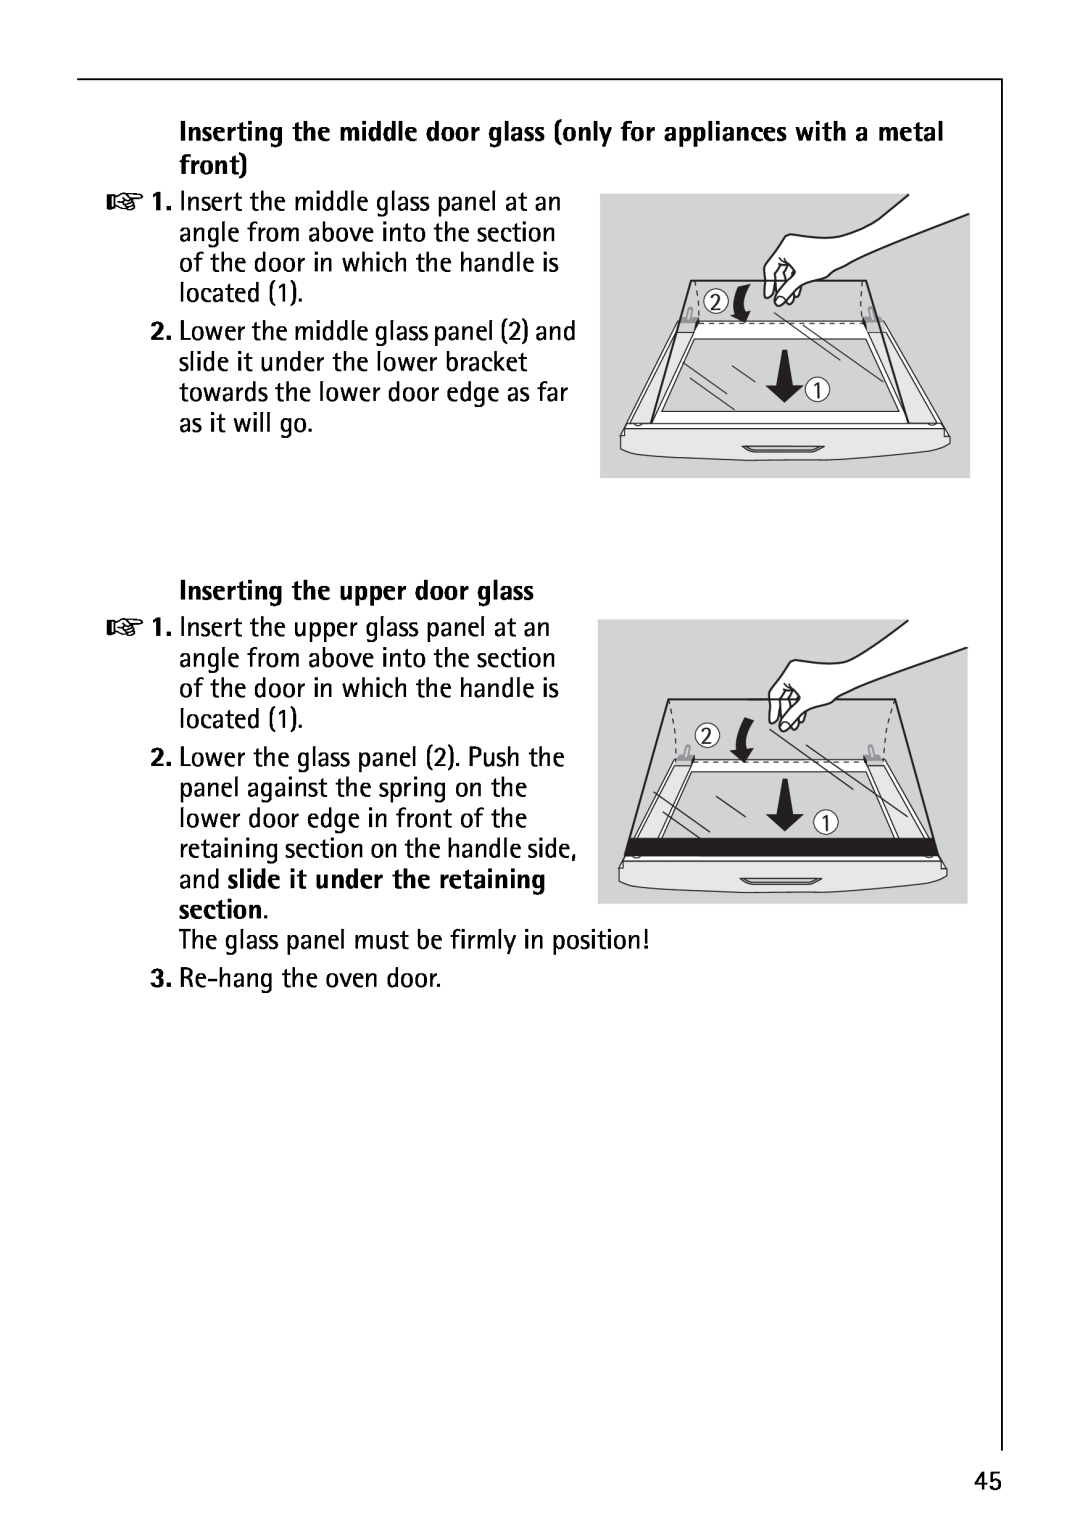 AEG E3100-1 manual Inserting the upper door glass, section 